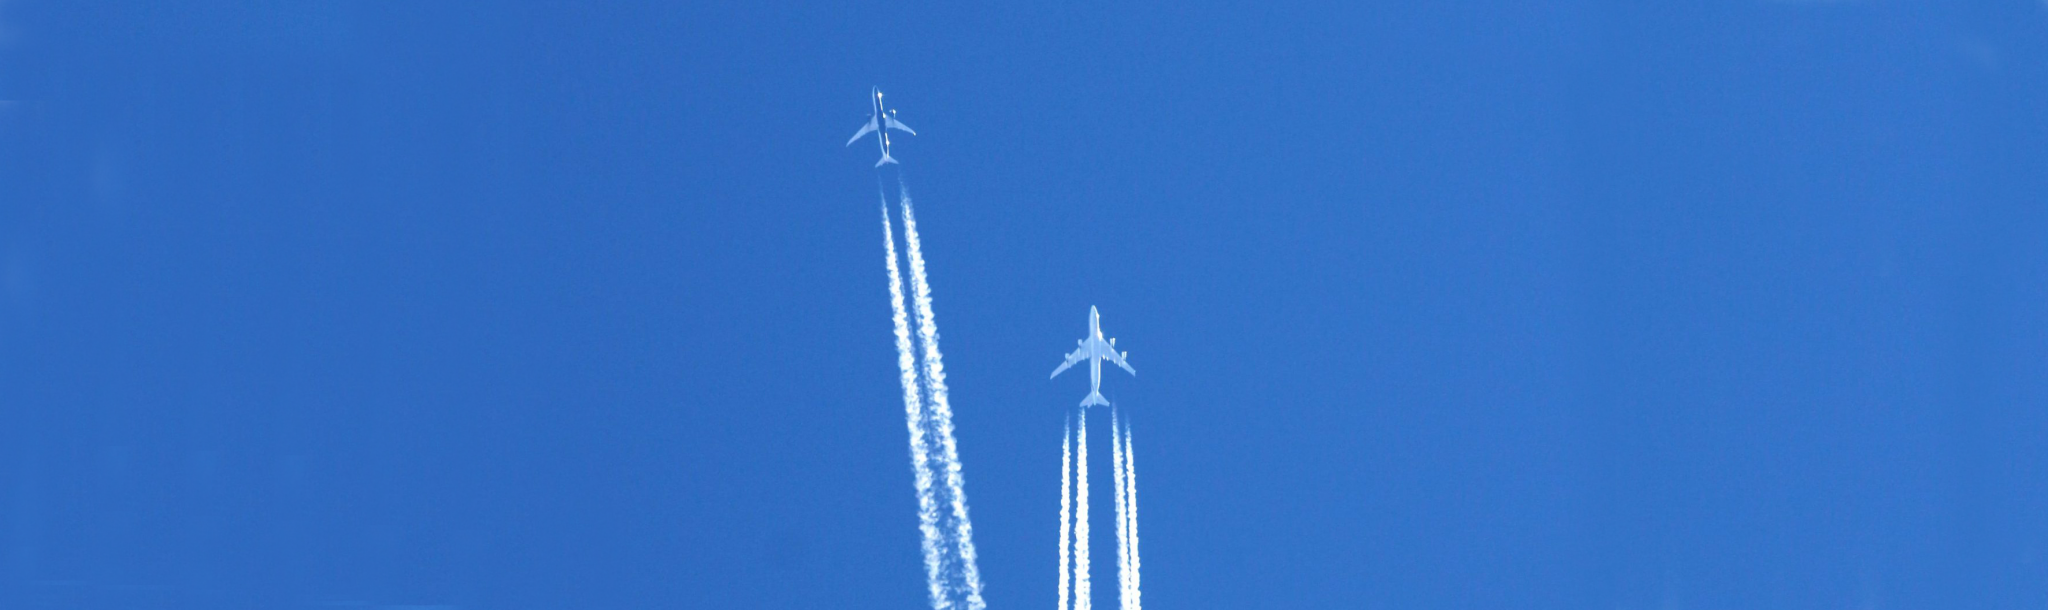 Airplanes in the sky